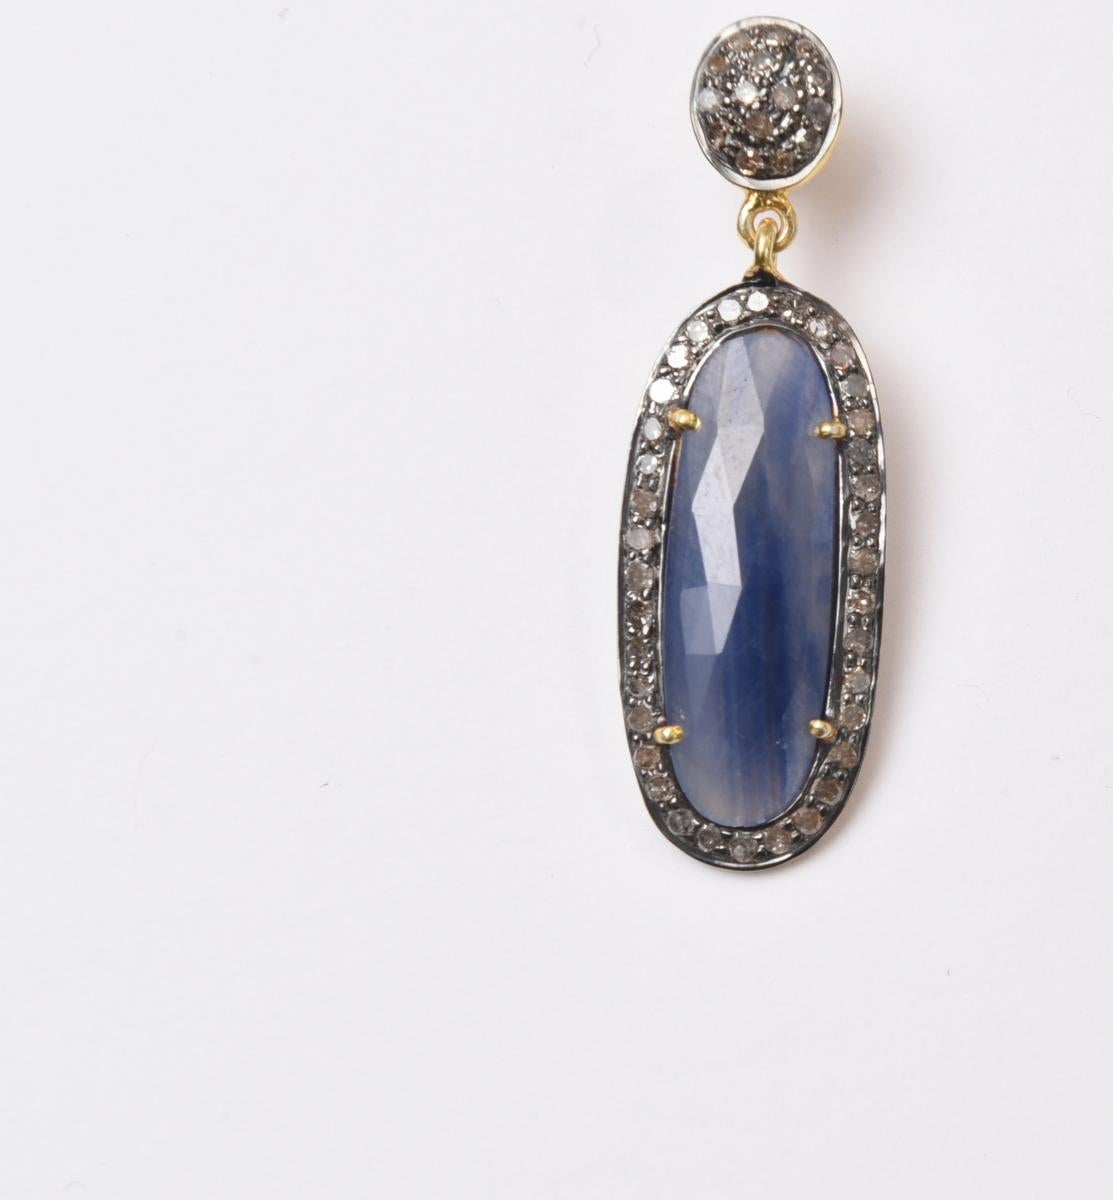 Rosecut blue sapphire oval slices as found in their natural state and then cut and polished, bordered with diamonds set in oxidized sterling silver.  Post is 18K gold for pierced ears, also with diamonds.  Total carat weight of sapphires is 14